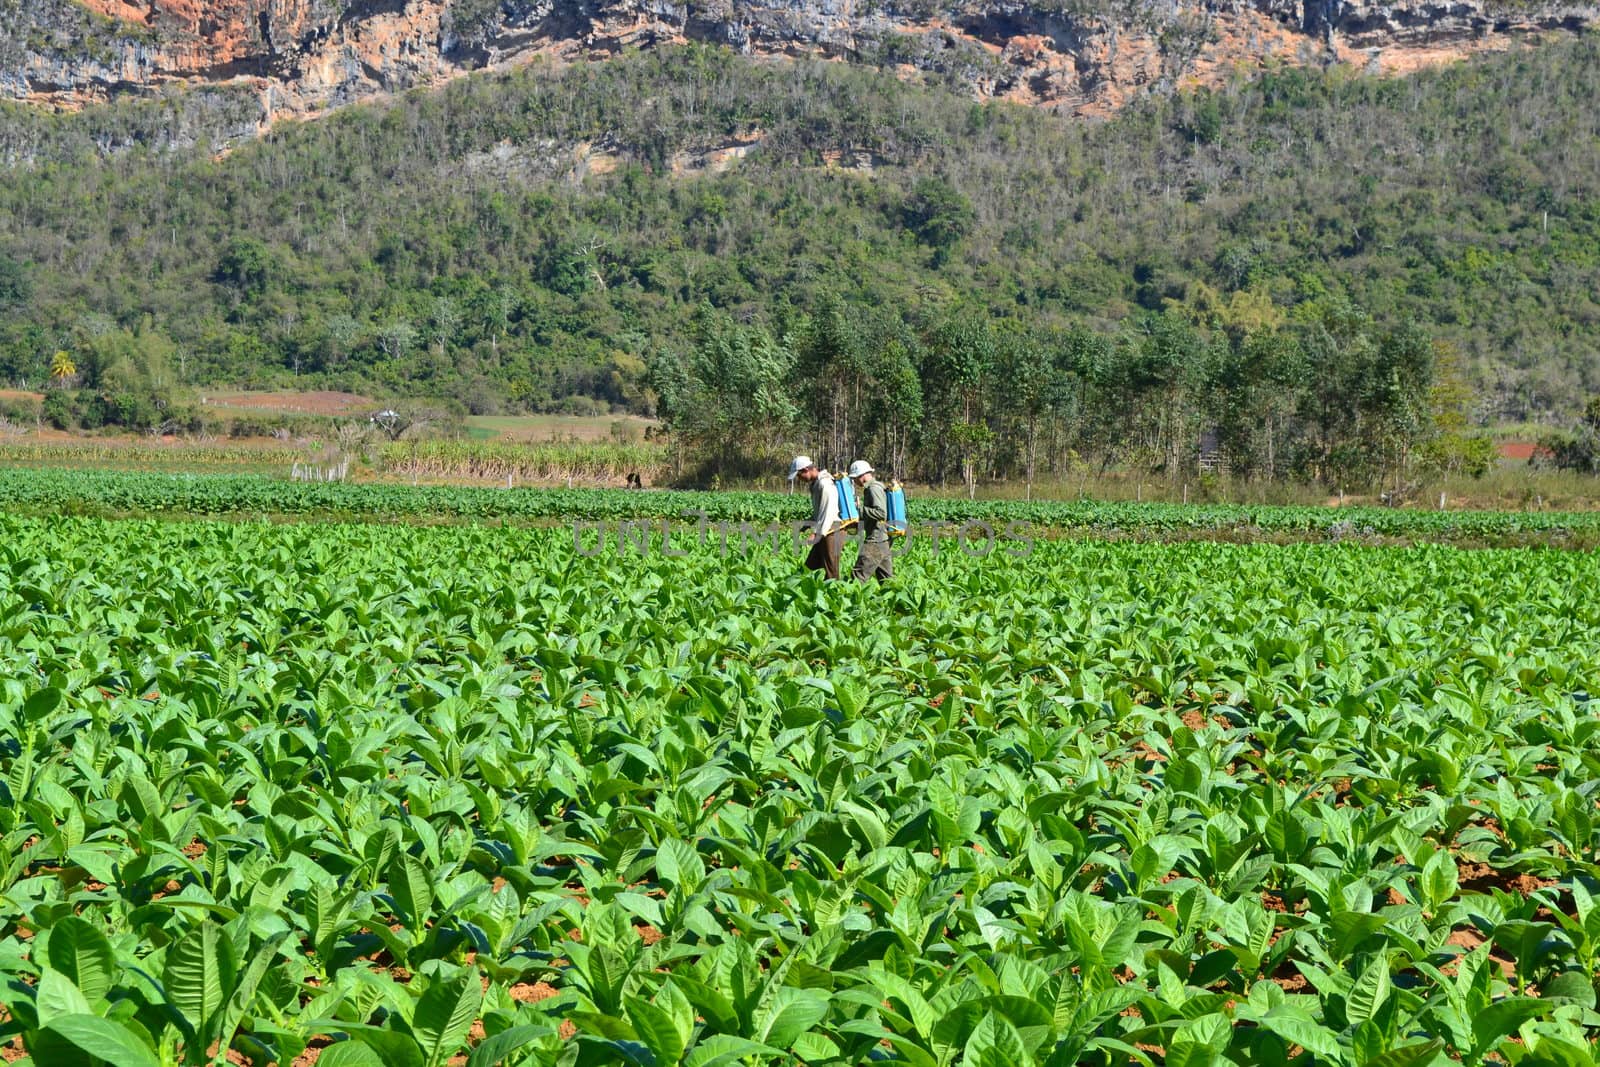 Cuban farmers spraying pesticide on a tobacco field in Vinales by kb79